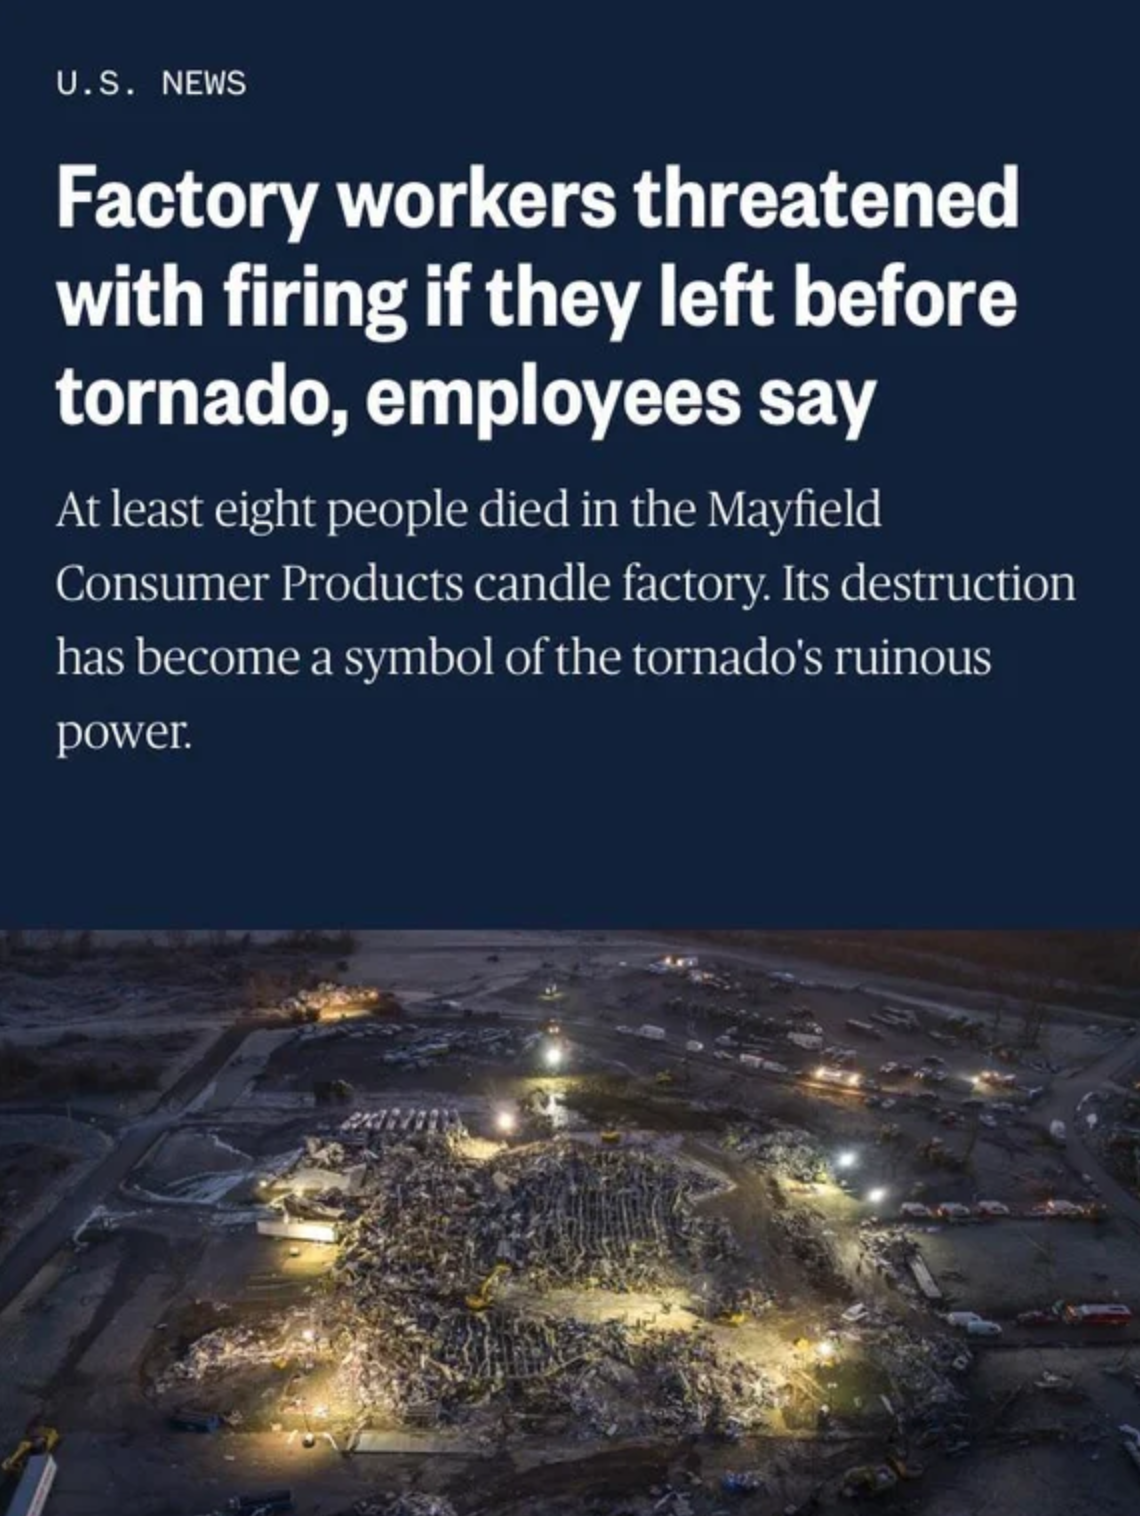 dystopian society things - U.S. News Factory workers threatened with firing if they left before tornado, employees say At least eight people died in the Mayfield Consumer Products candle factory. Its destruction has become a symbol of the tornado's ruinou